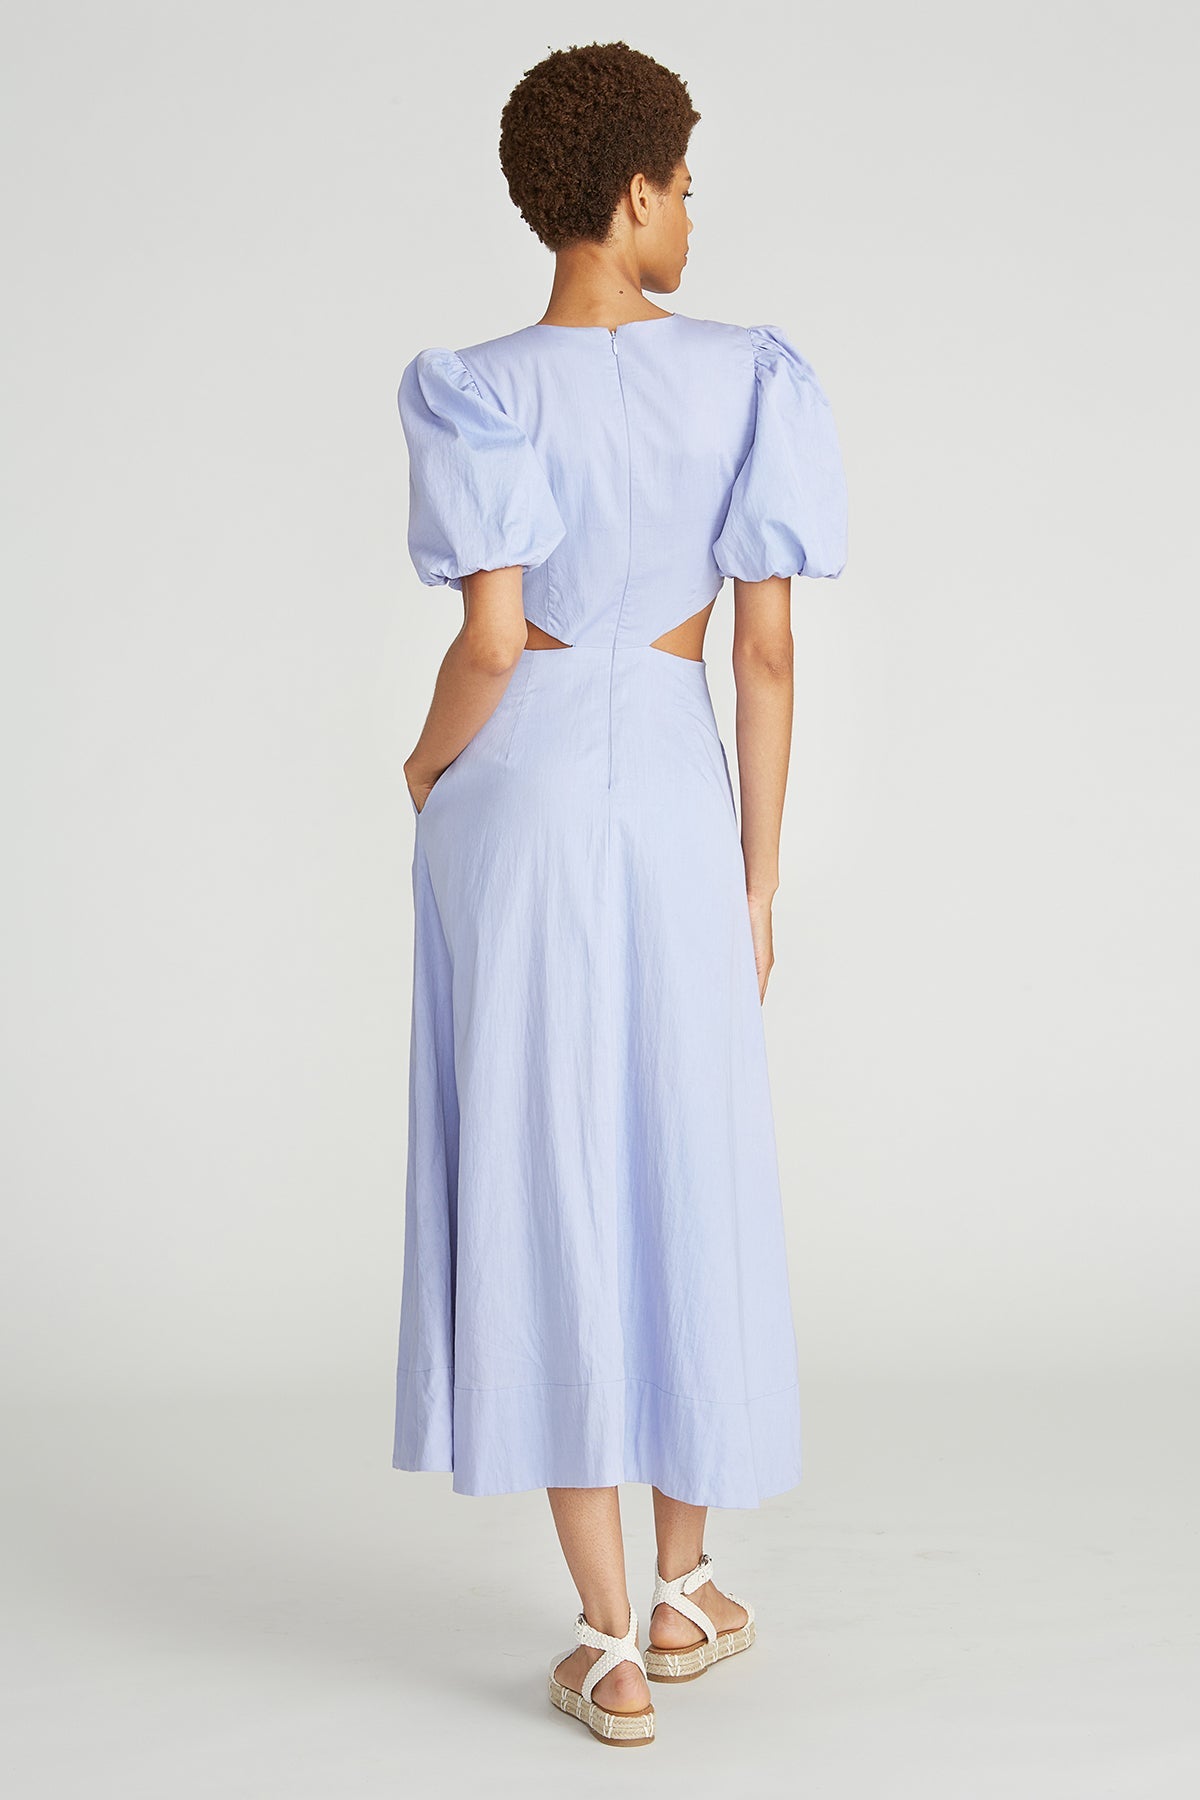 Effortlessly slip into the crisp cotton poplin Gio midi dress, featuring delicate puff sleeves, intricate leaf embroidery, and flattering cutouts along the waistline. A versatile and feminine addition to any wardrobe.